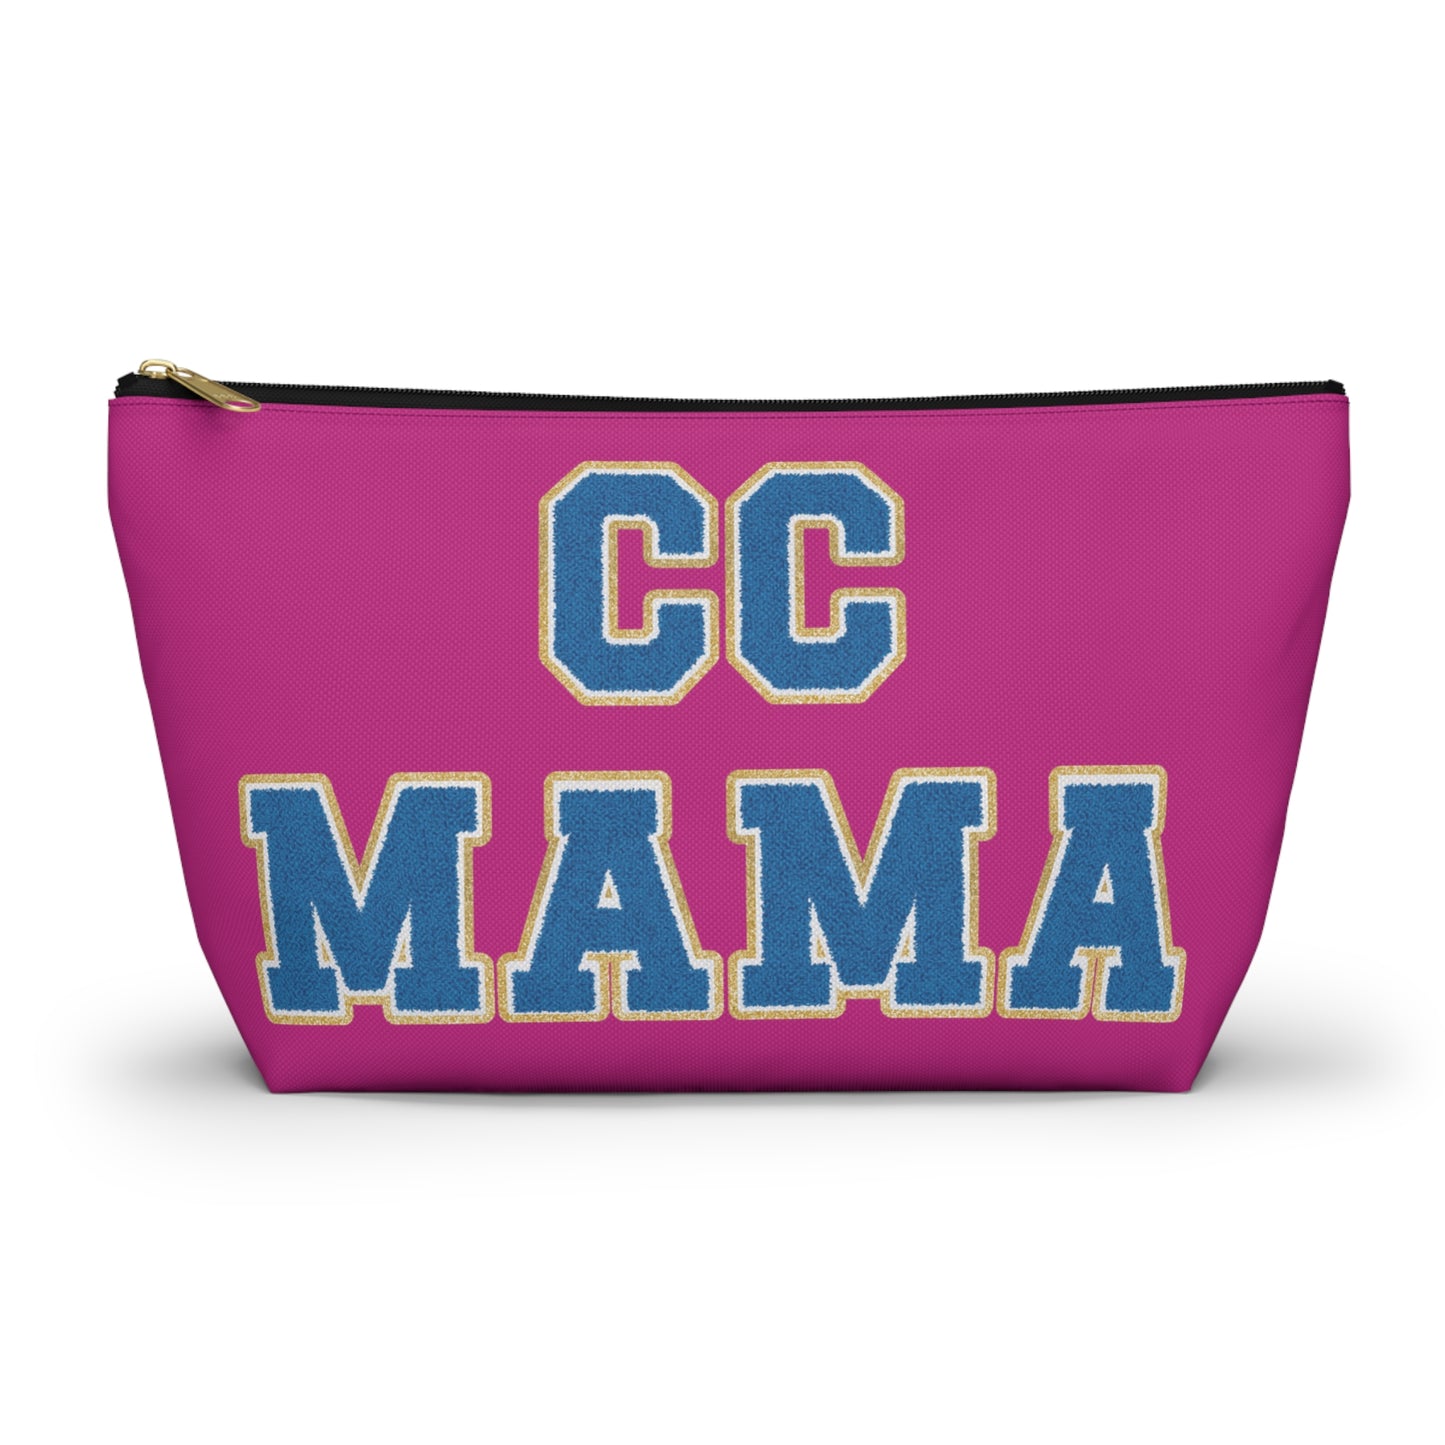 CC Mama Varsity Lettered Pink Zippered pouch